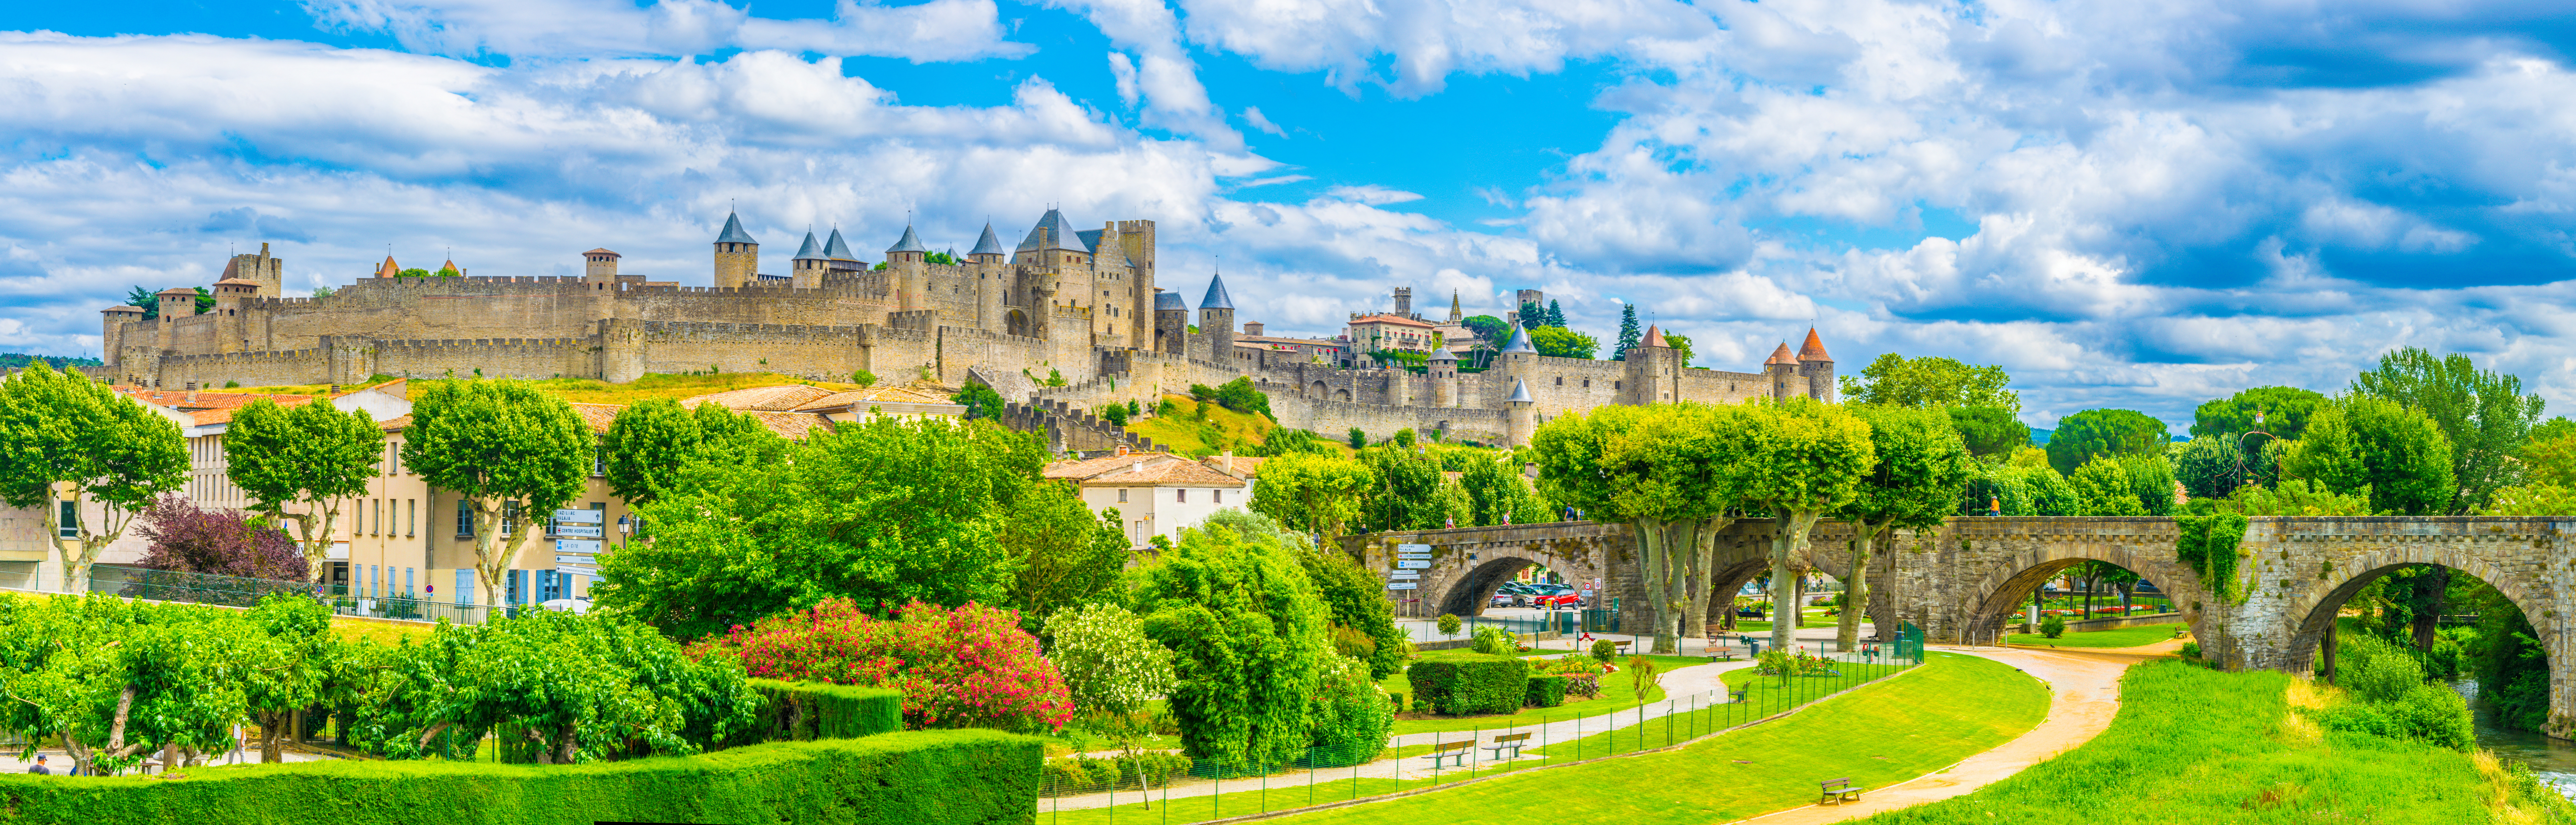 Storybook Towns in France - Old Town of Carcassonne